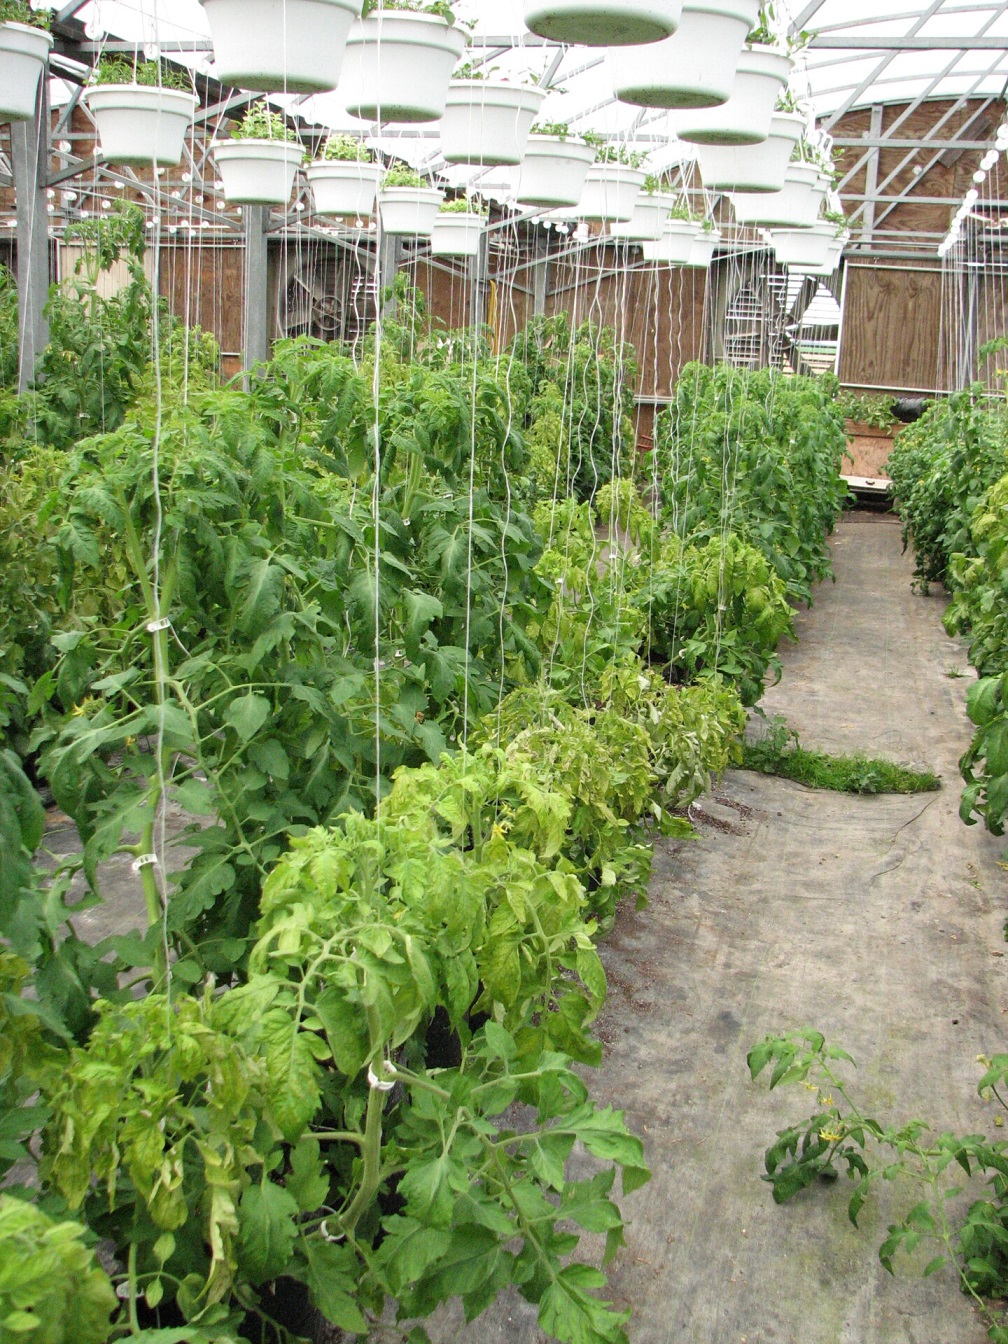 Symptoms of tomato spotted wilt virus include stunting such can be seen in the tomatoes on the right. Note the baskets of hanging flowers in the greenhouse.